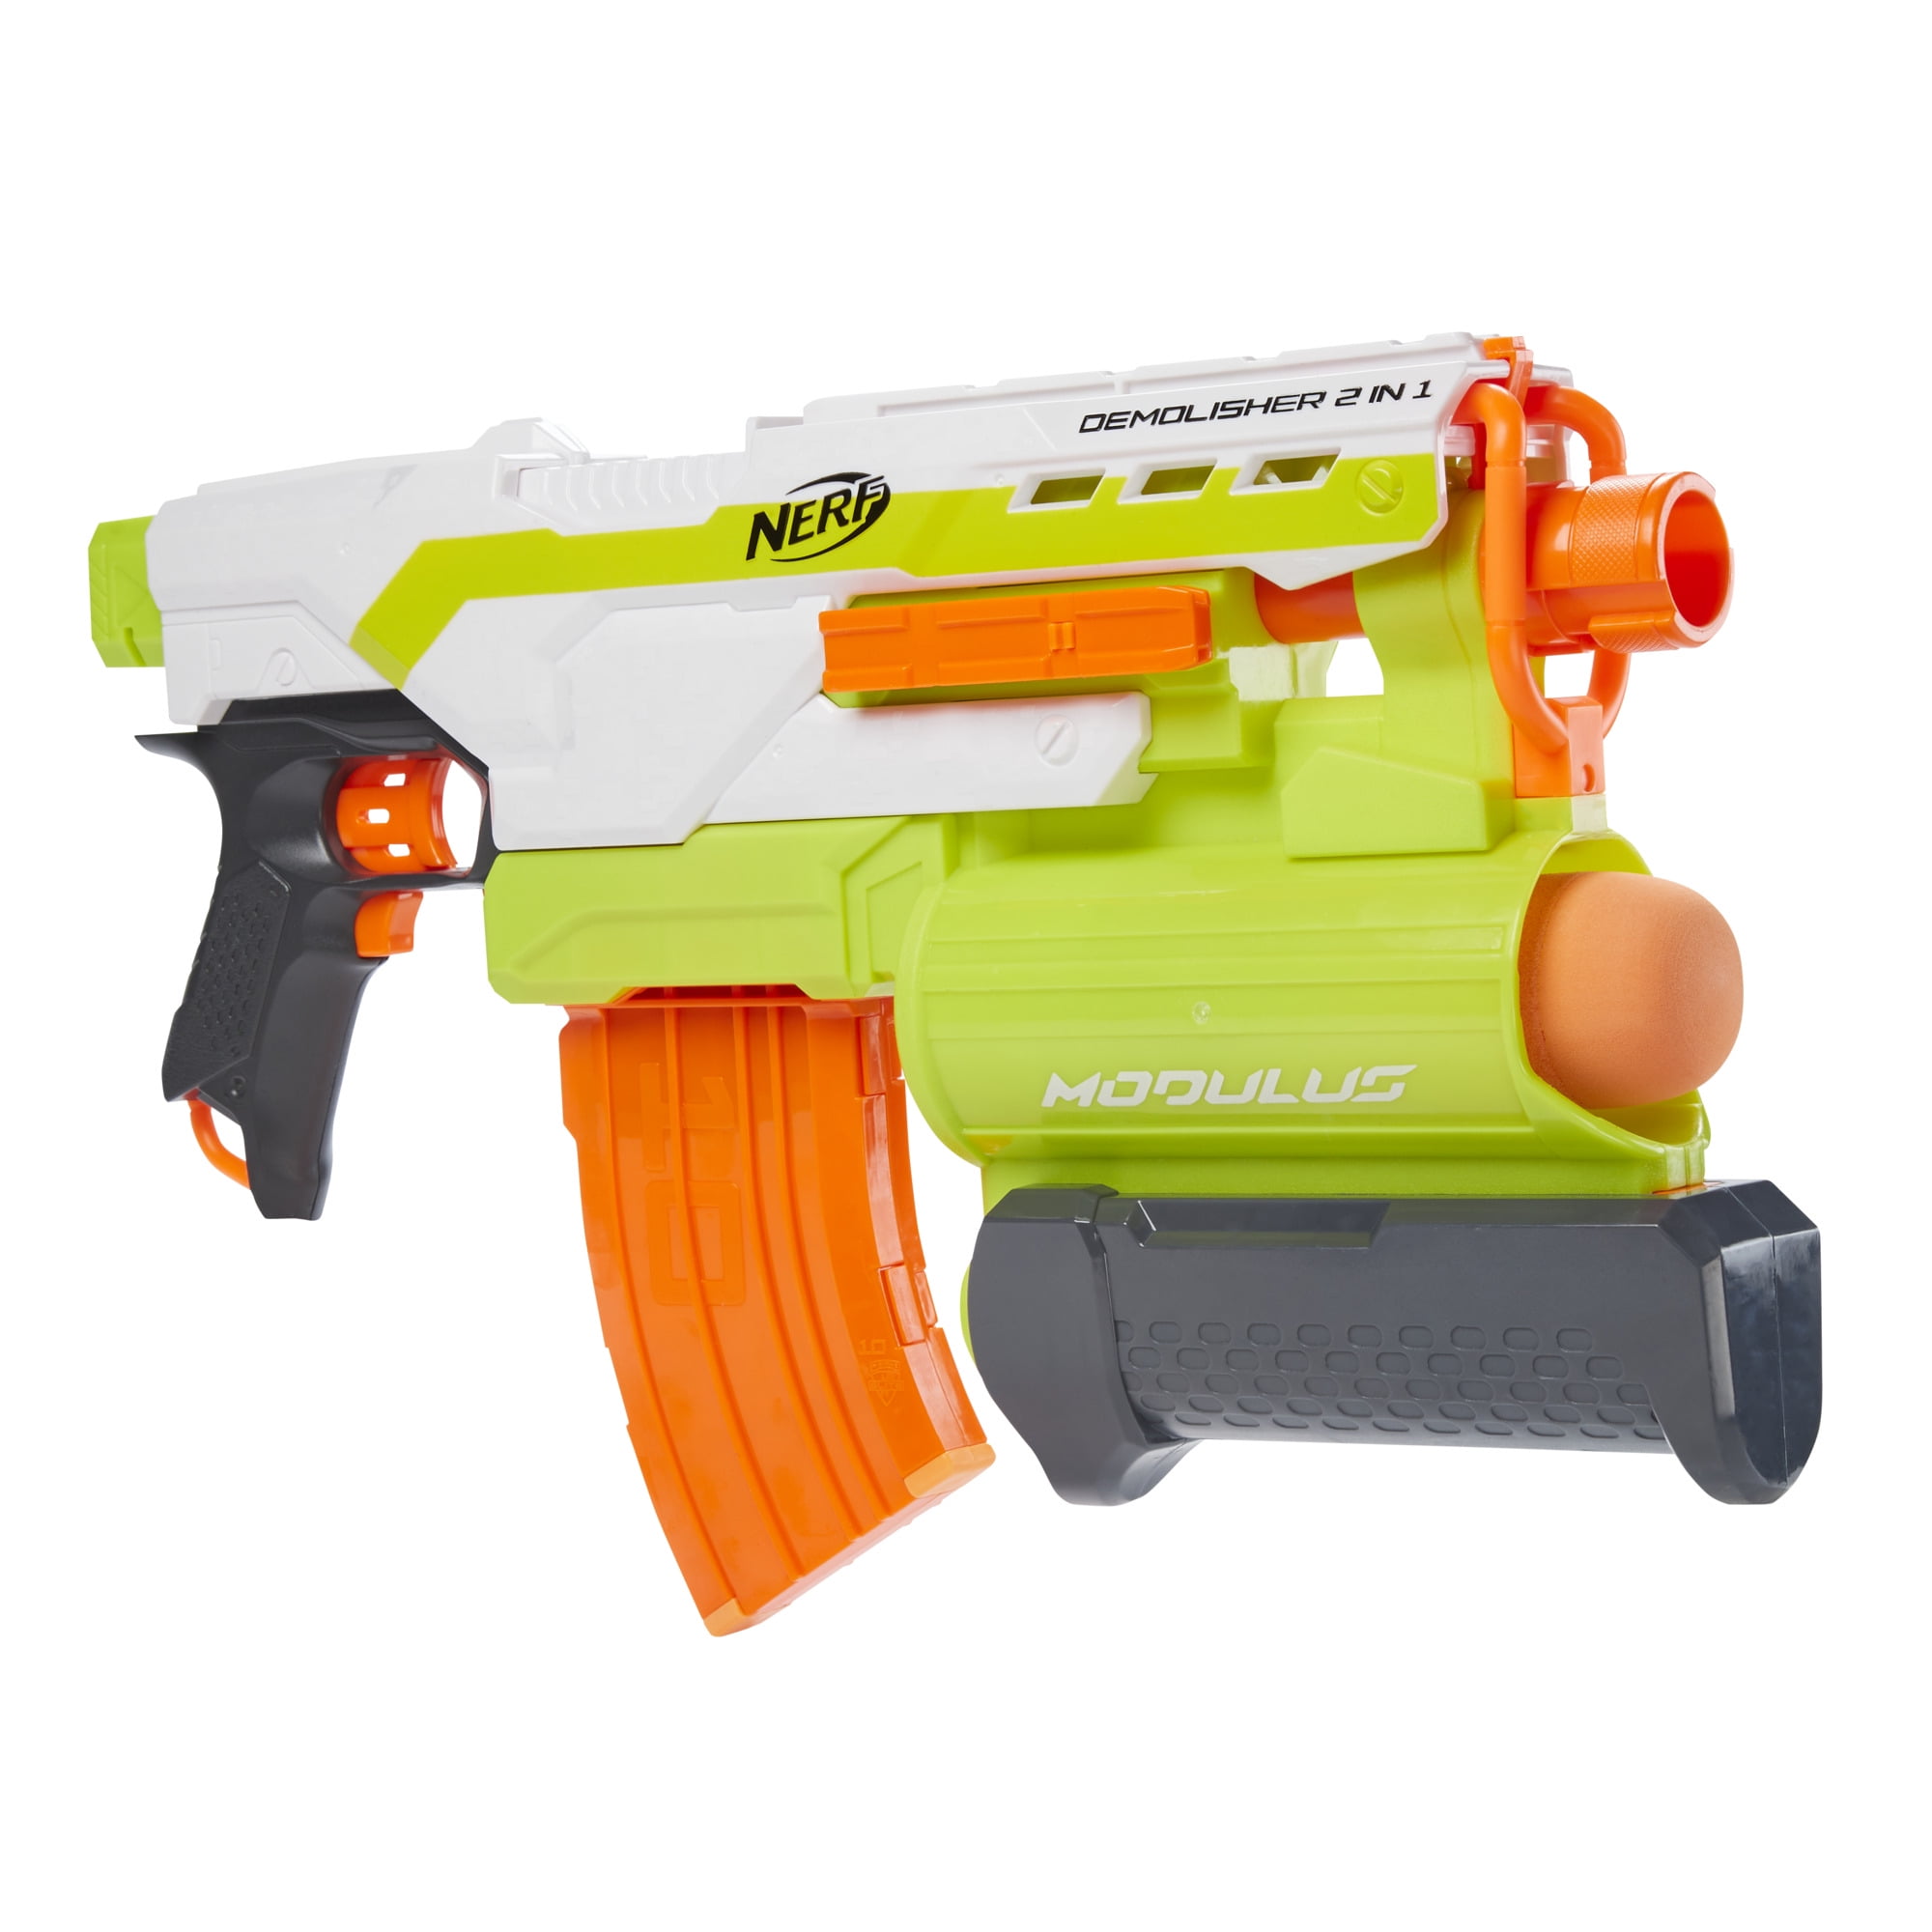 Save 57% on the Nerf Modulus Demolisher 2-in-1 motorized dart and